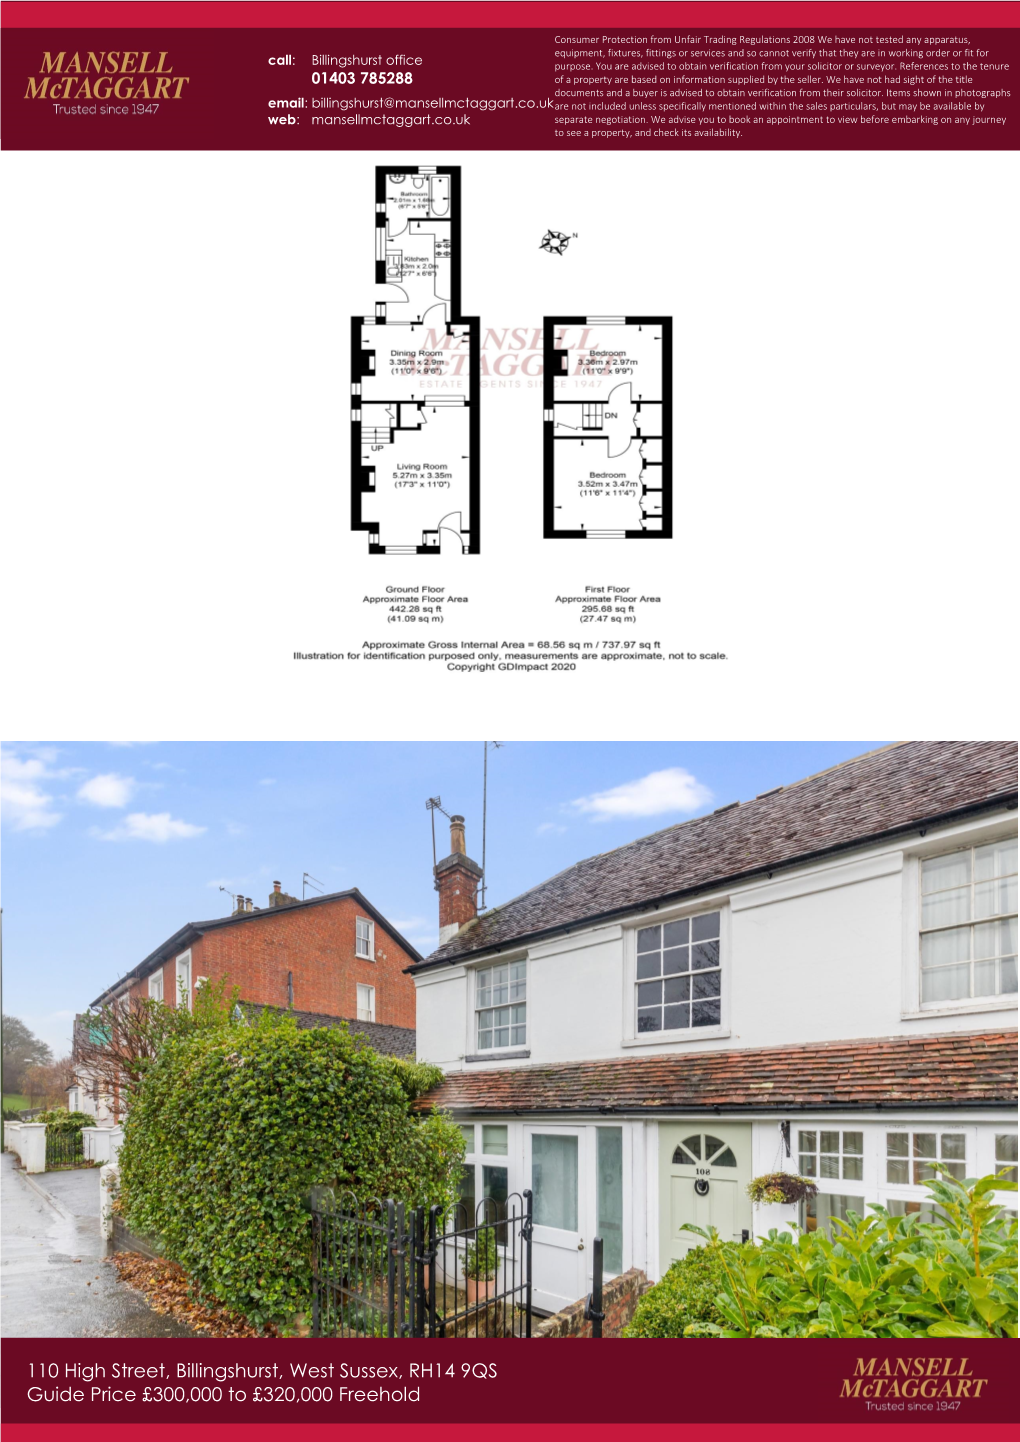 110 High Street, Billingshurst, West Sussex, RH14 9QS Guide Price £300,000 to £320,000 Freehold